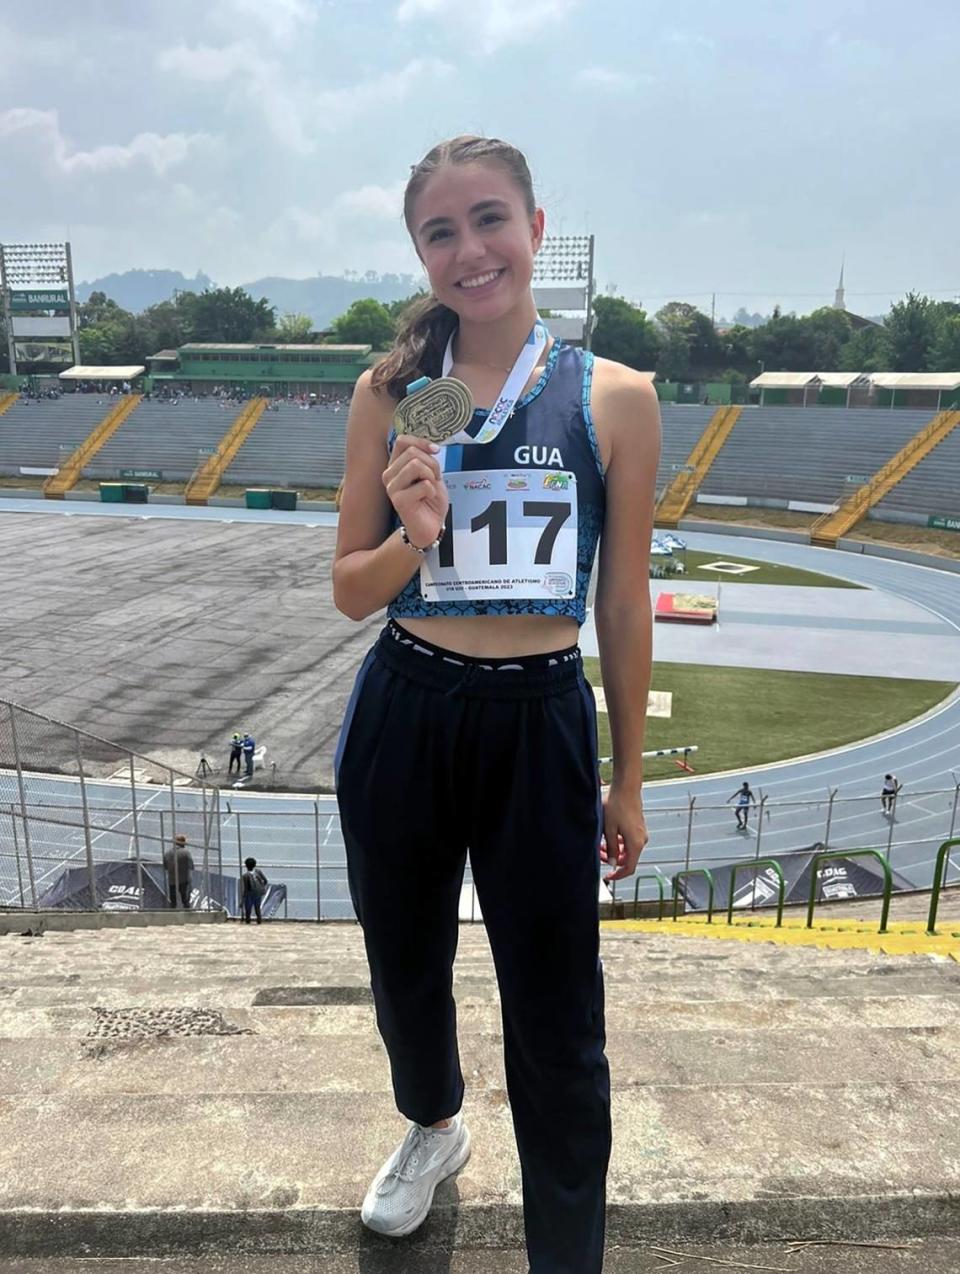 Palmer Trinity’s Maria Camposano Paiz not only won the race but also broke the Guatemalan record in the 100-meter hurdles in the under-18 division of the Central American Championships U18 U20 in Guatemala City.